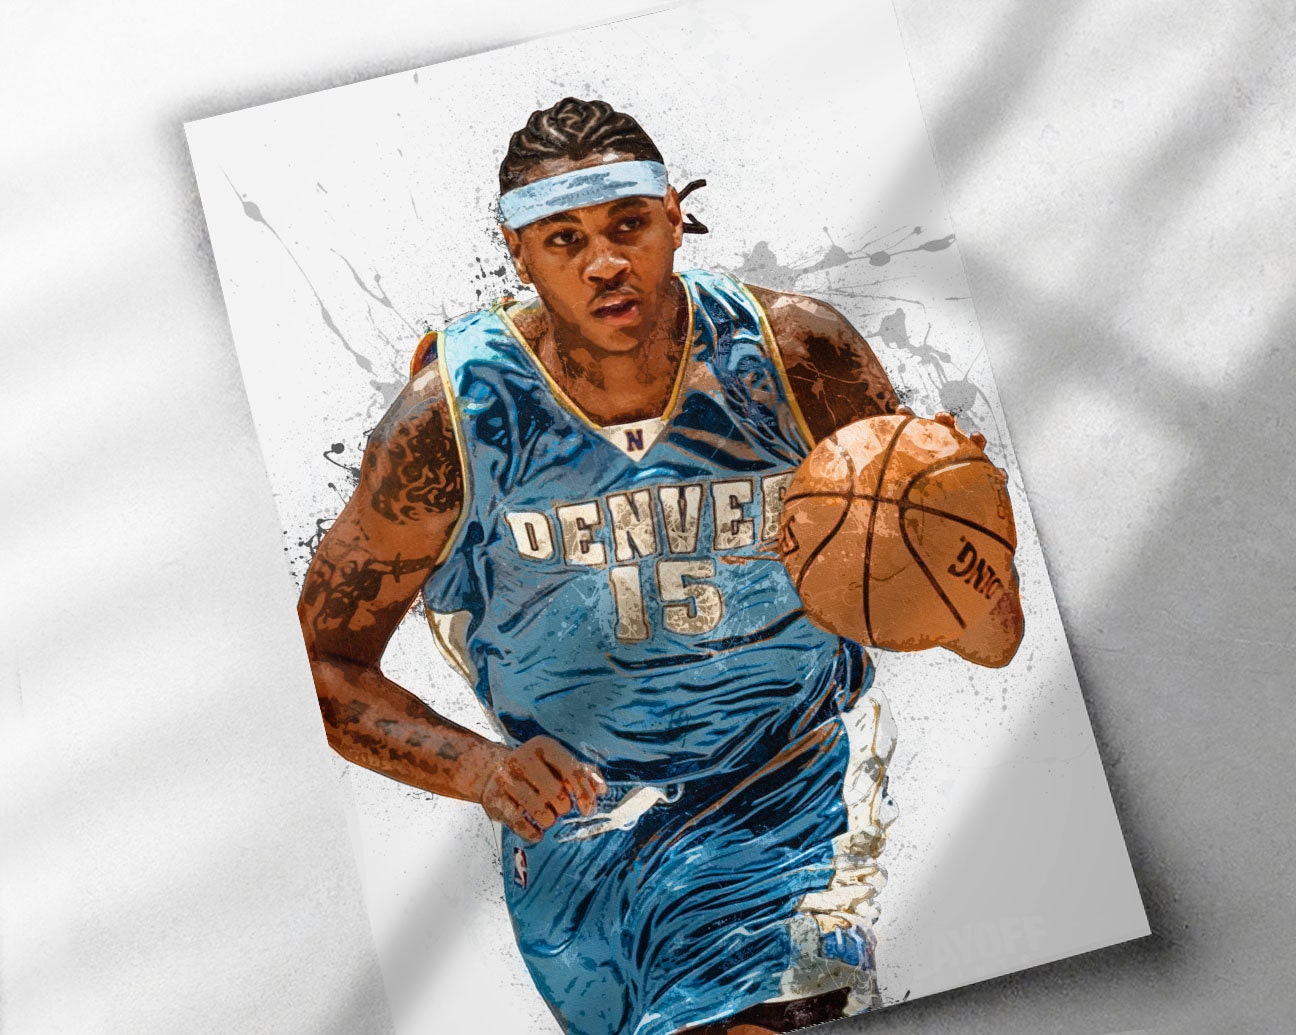 Carmelo Anthony Posters for Sale